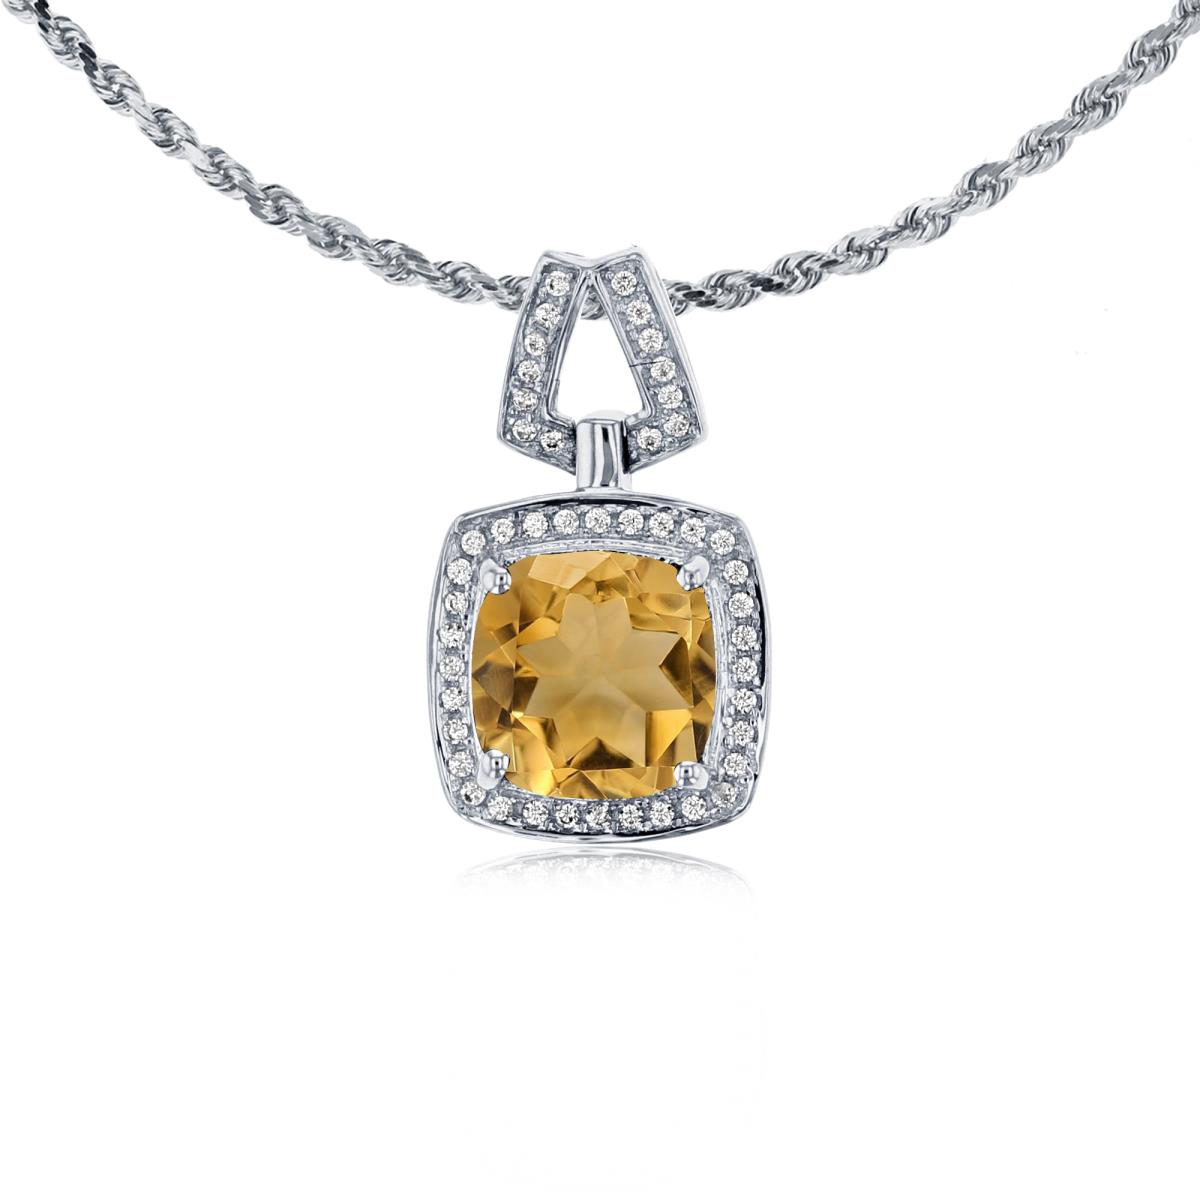 10K White Gold 7mm Cushion Citrine & 0.10 CTTW Diamond Halo 18" Rope Chain Necklace